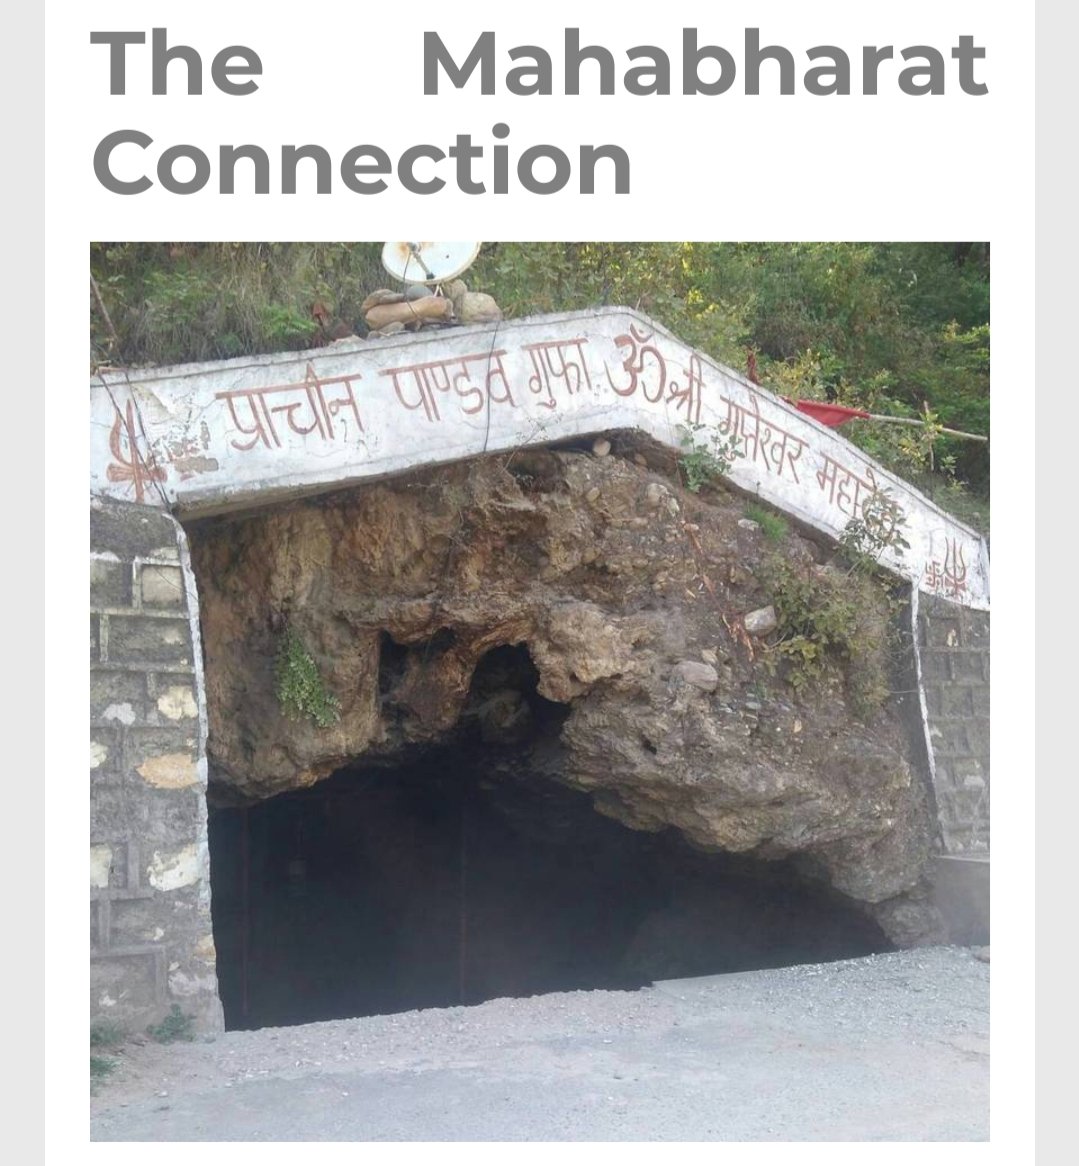 Unmissable Mahabharata connection says this was established by Yudhishthir during their agyaatvaas. Duryodhan tried to kill Pandavas here by making them stay at LakshaGriha, house of Wax. Luckily Pandavas escaped through a Cave called Dhundhi Odaari, meaning misty or foggy cave.